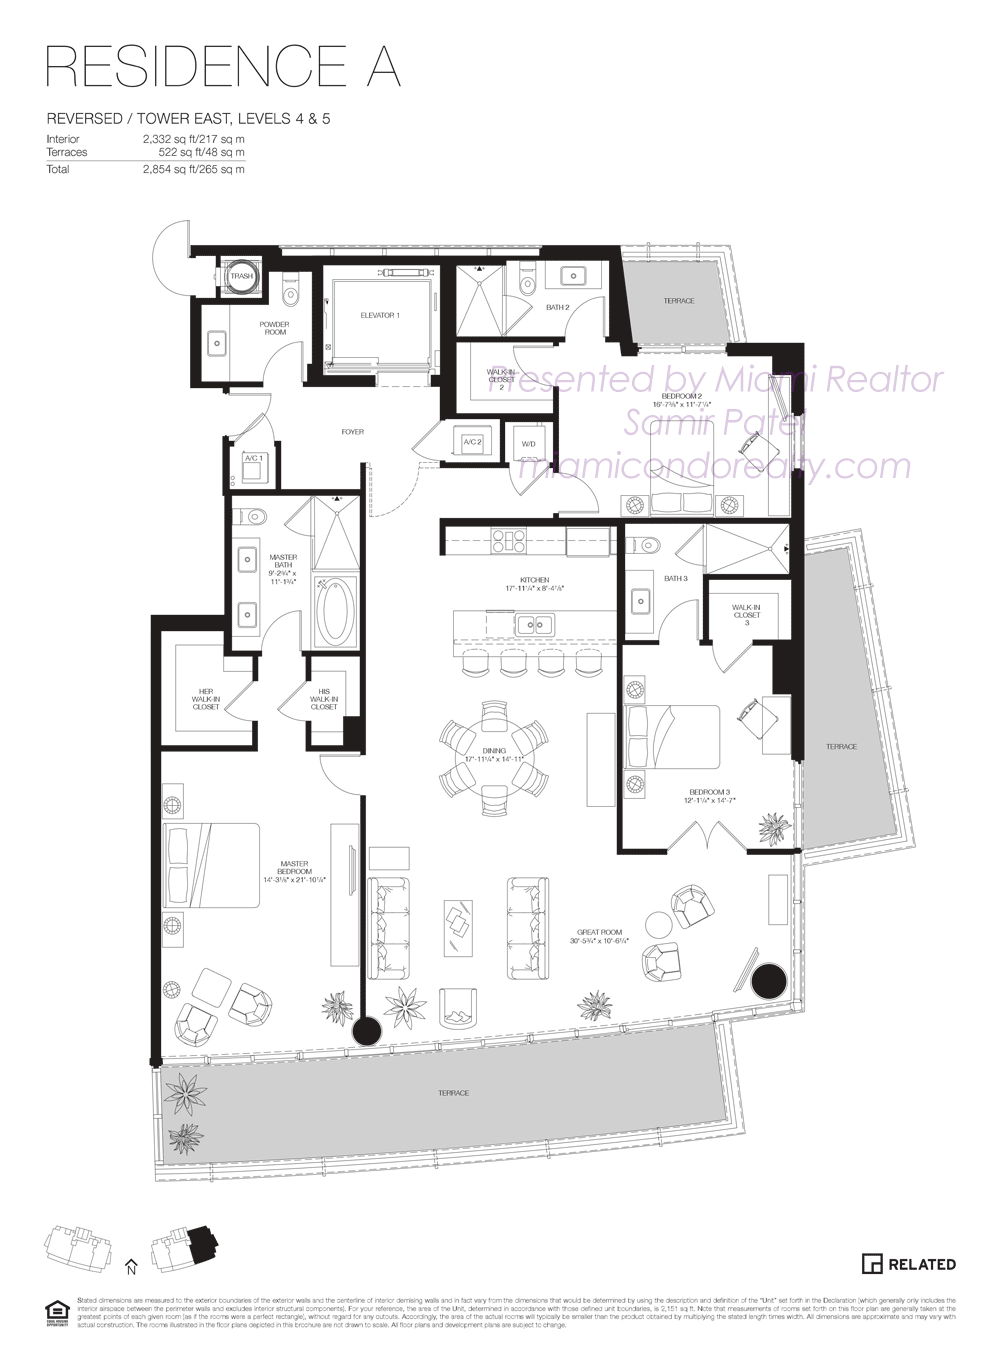 Floorplan of Marea Miami Beach Condo East Tower 4th and 5th Floor Residence A